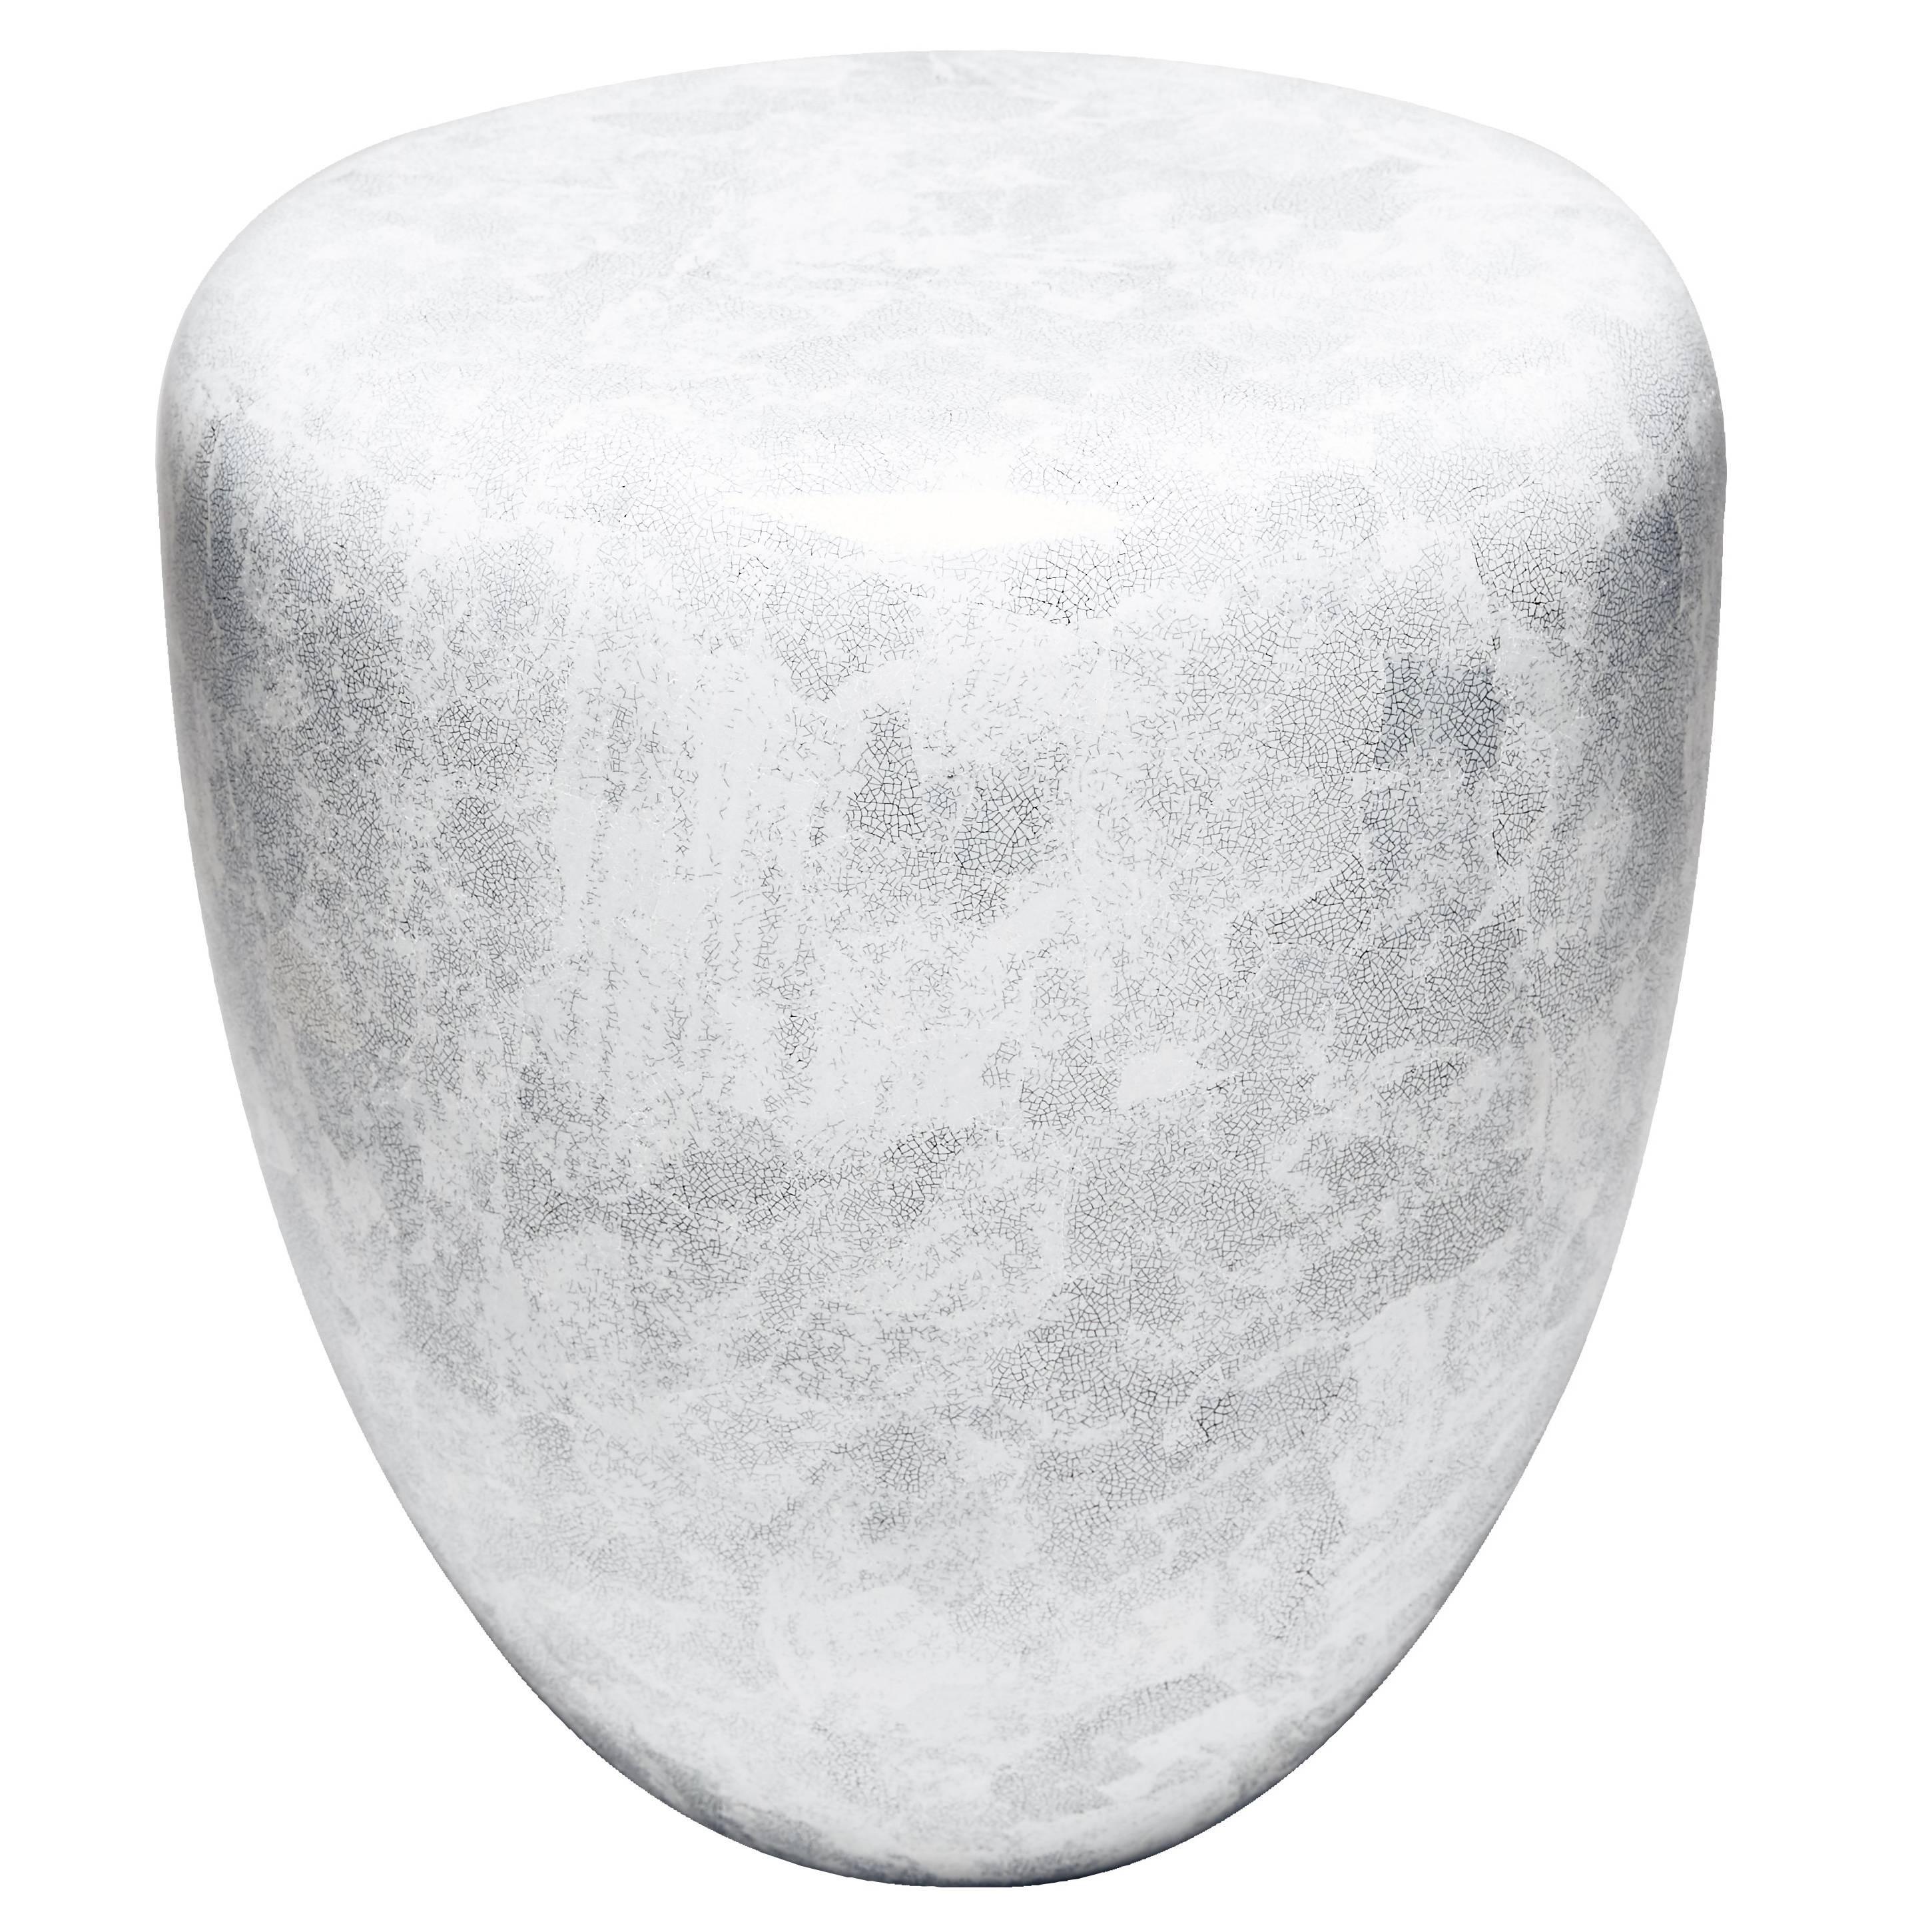 Side Table, White Eggshell DOT by Reda Amalou Design, 2016-Glossy or mate For Sale